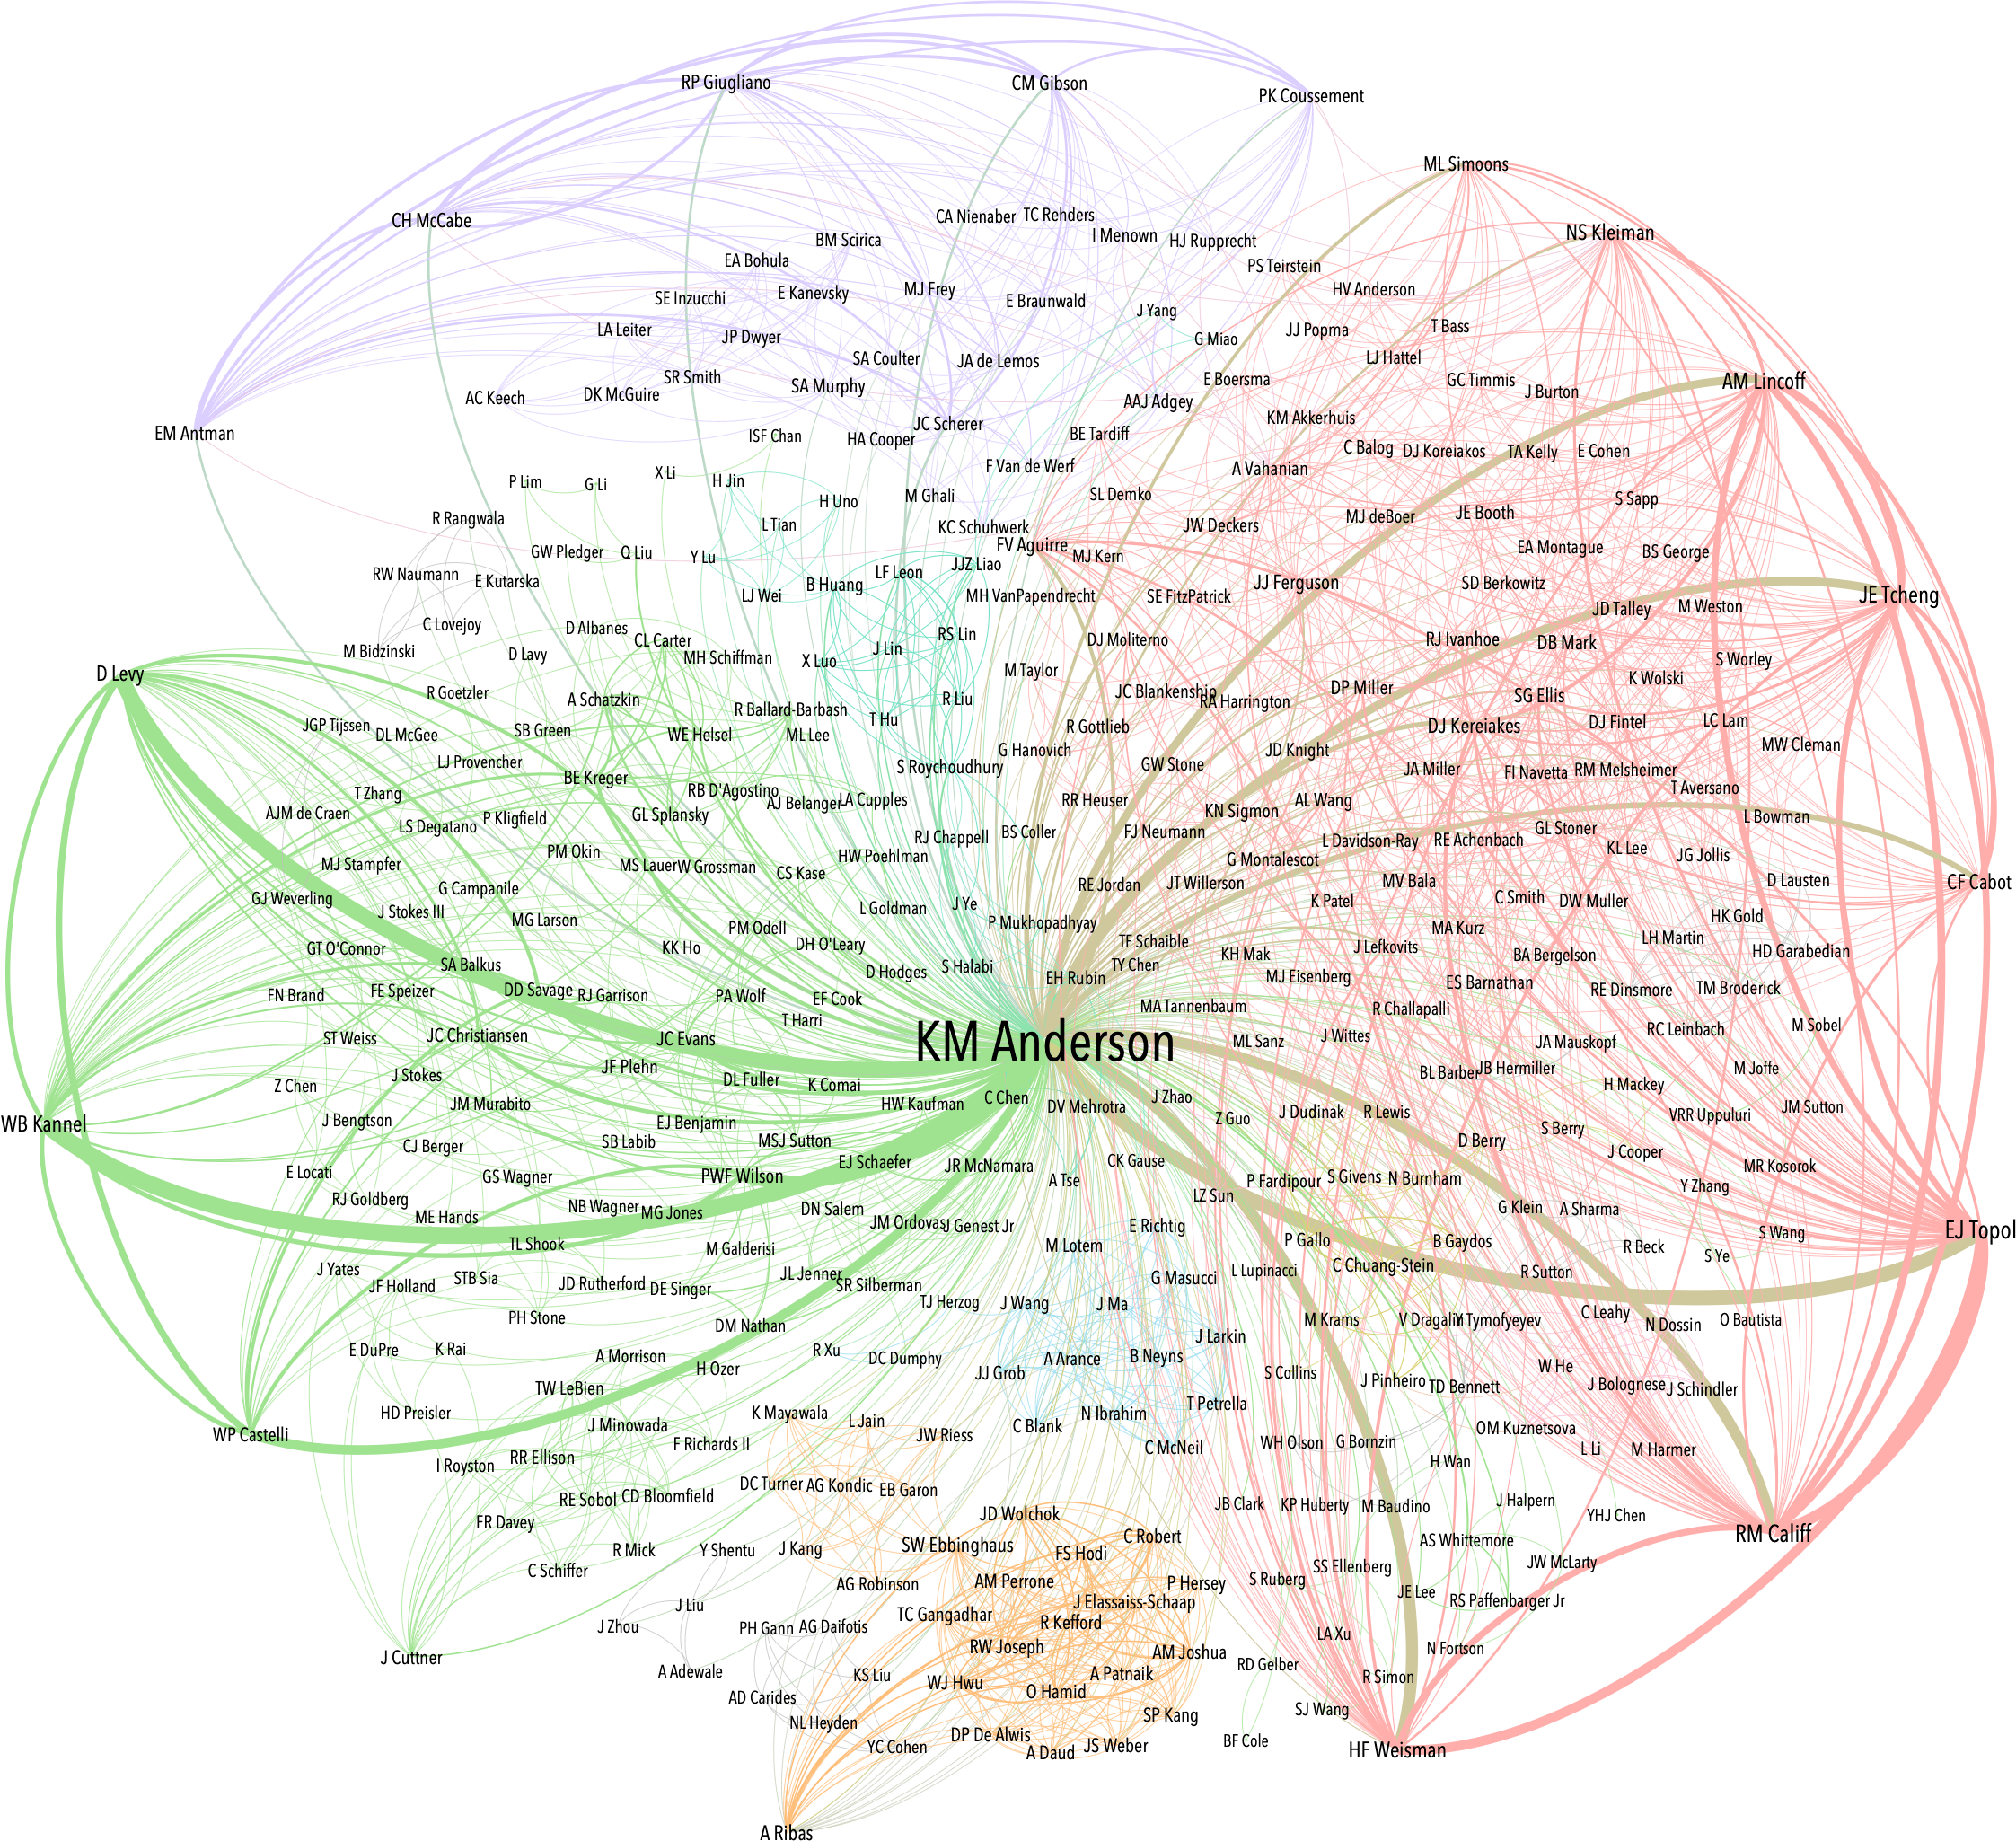 A visualization of my co-authorship network.